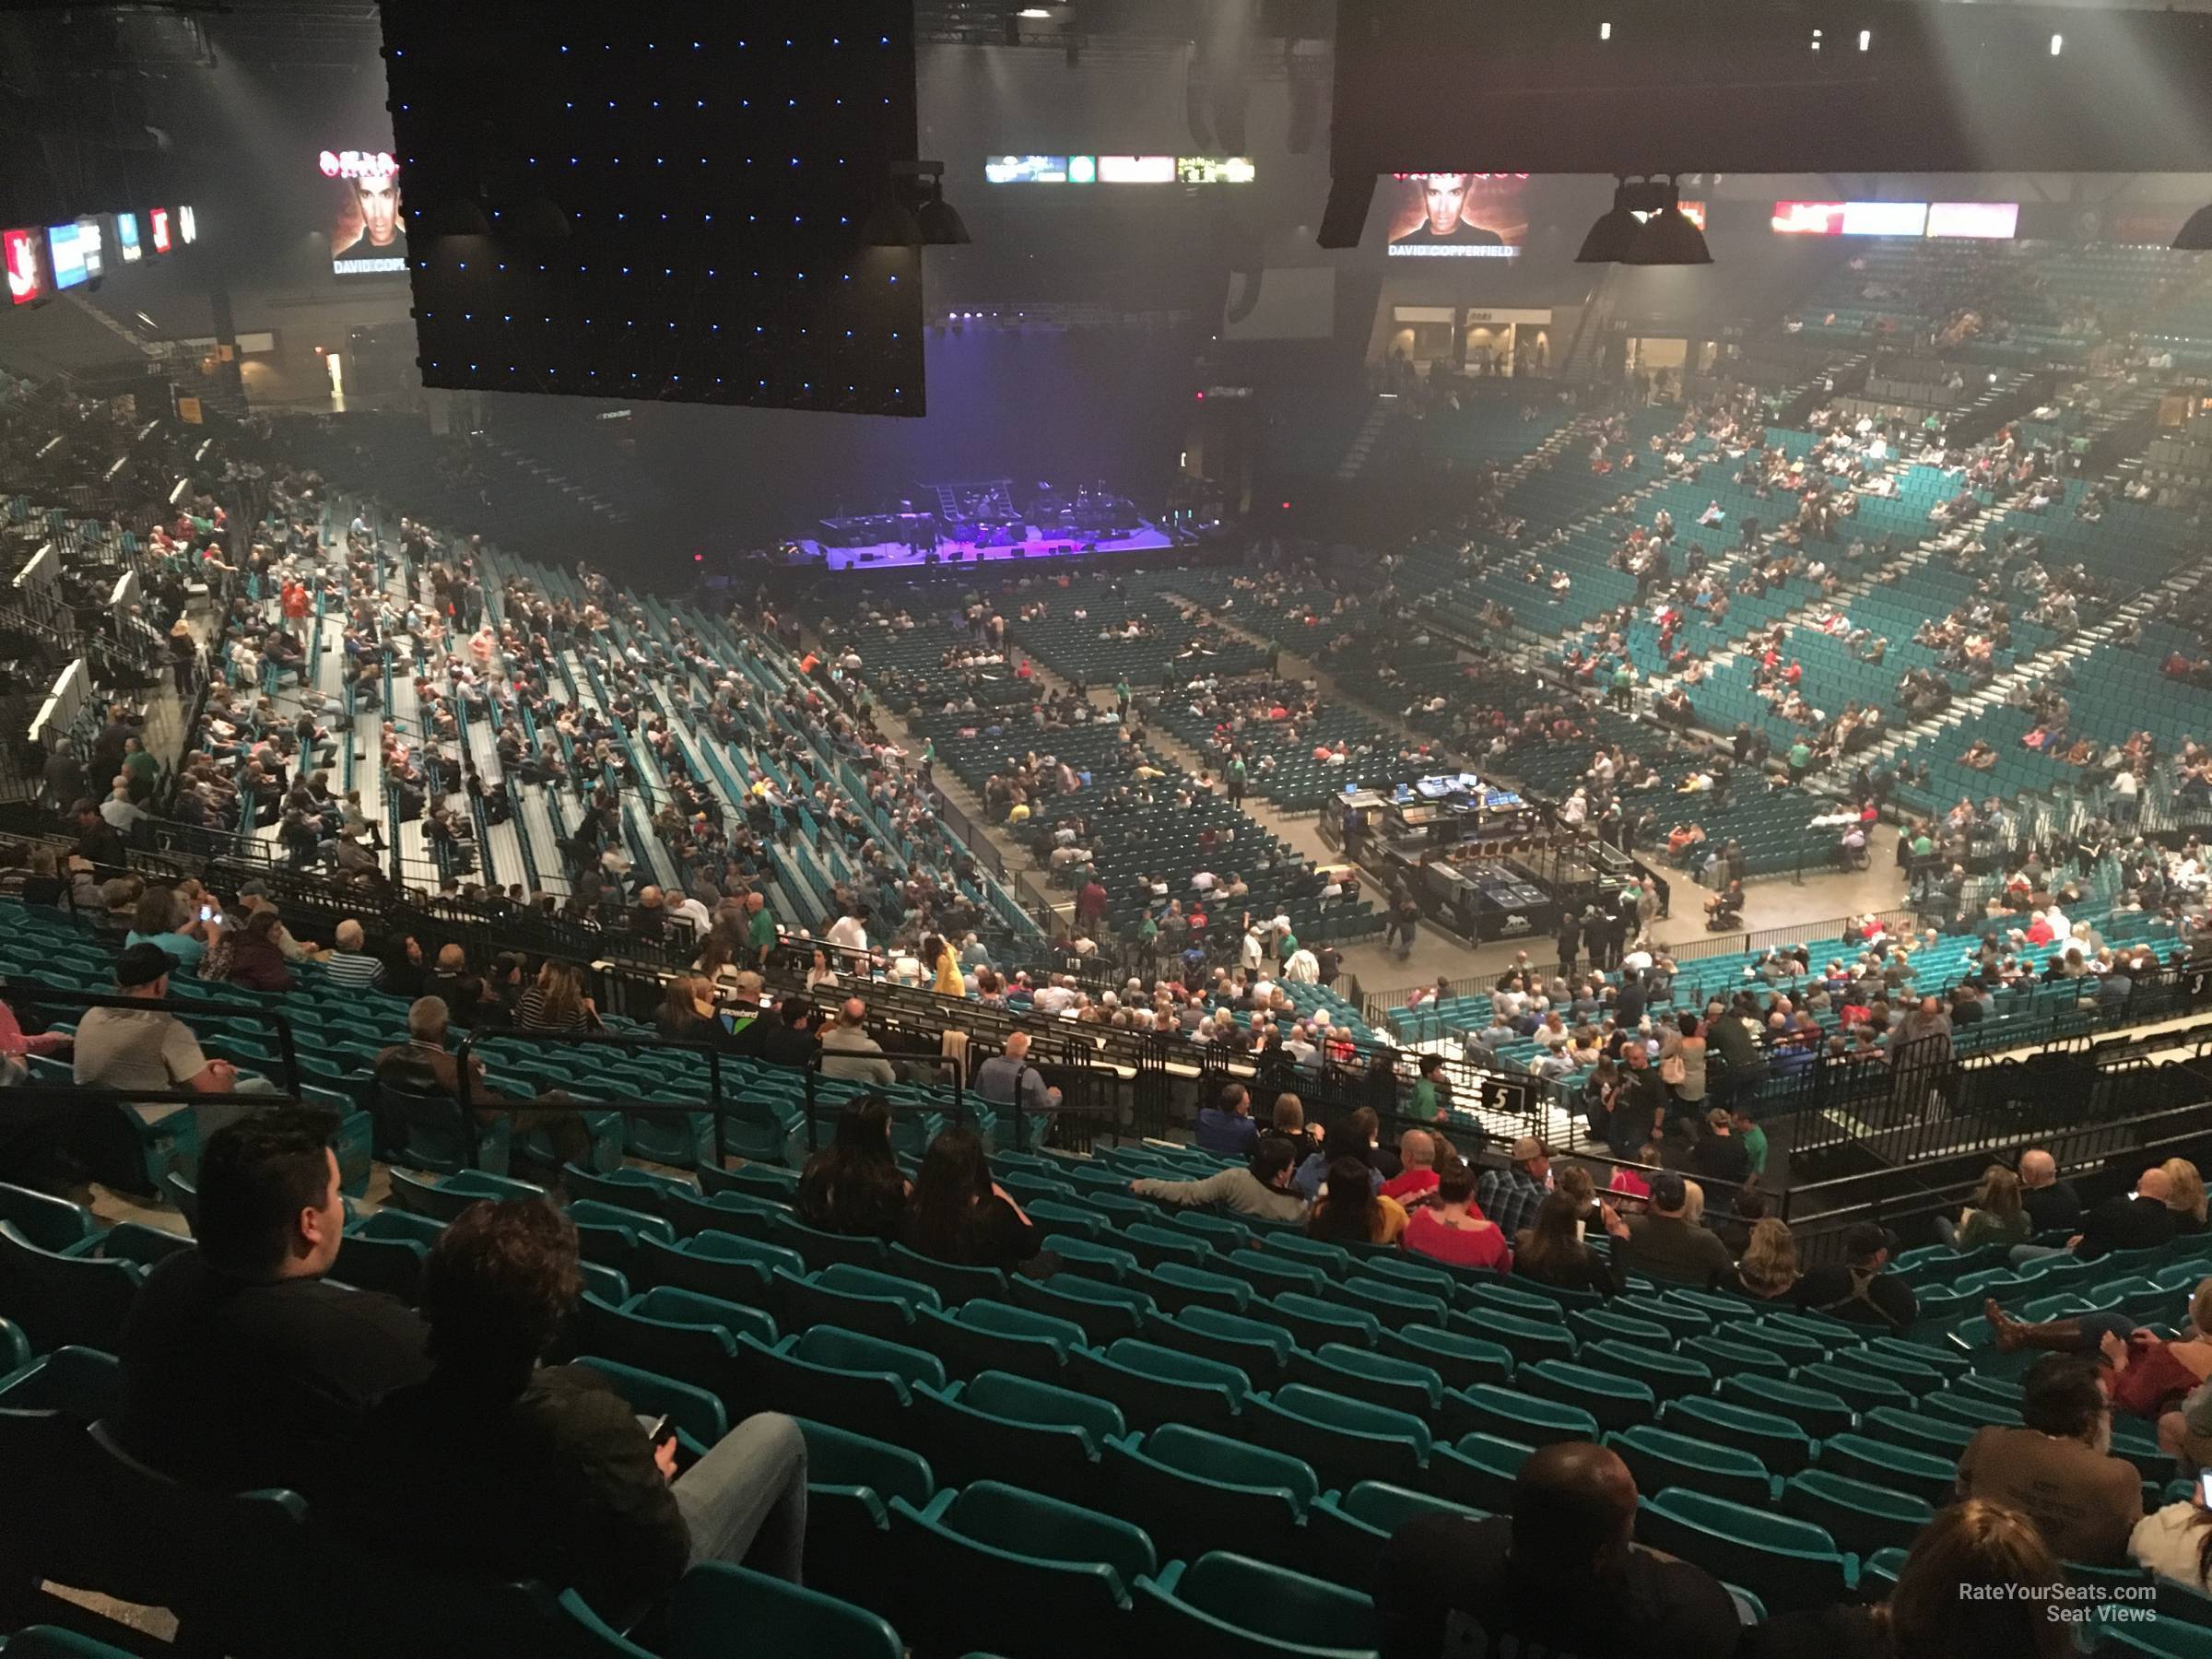 MGM Grand Garden Arena Section 205 - RateYourSeats.com